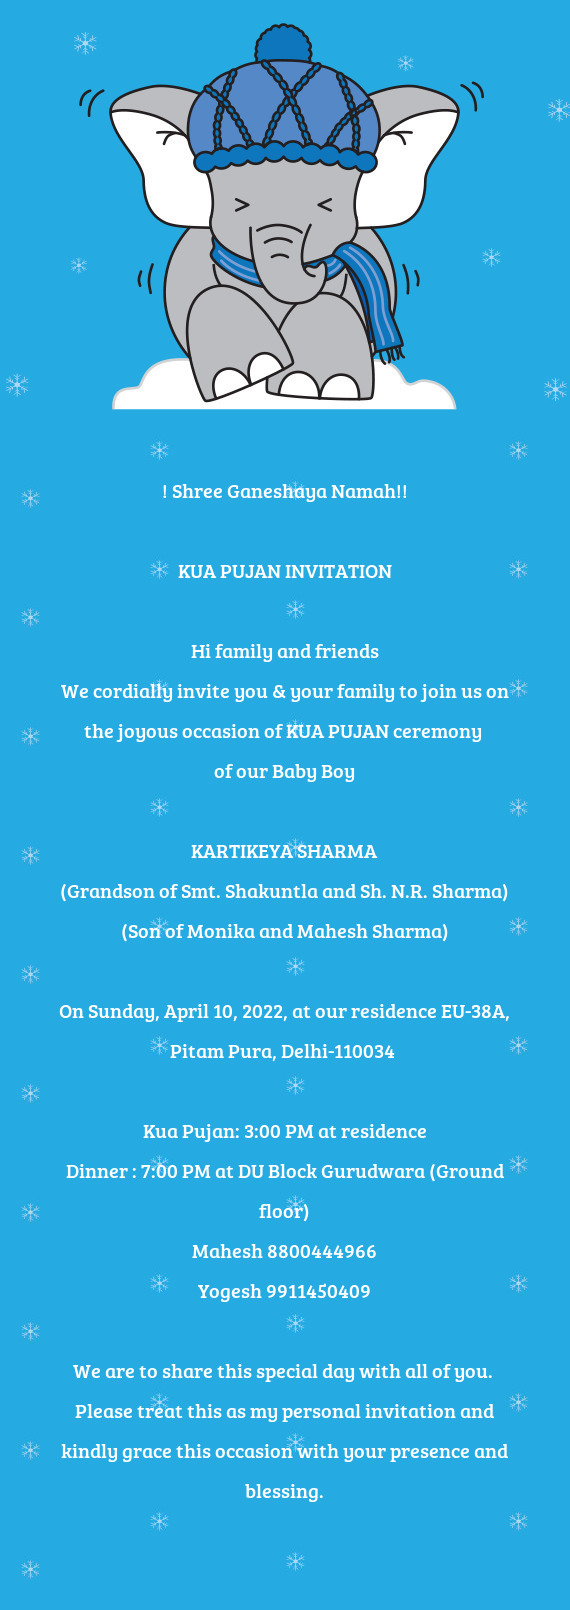 We cordially invite you & your family to join us on the joyous occasion of KUA PUJAN ceremony